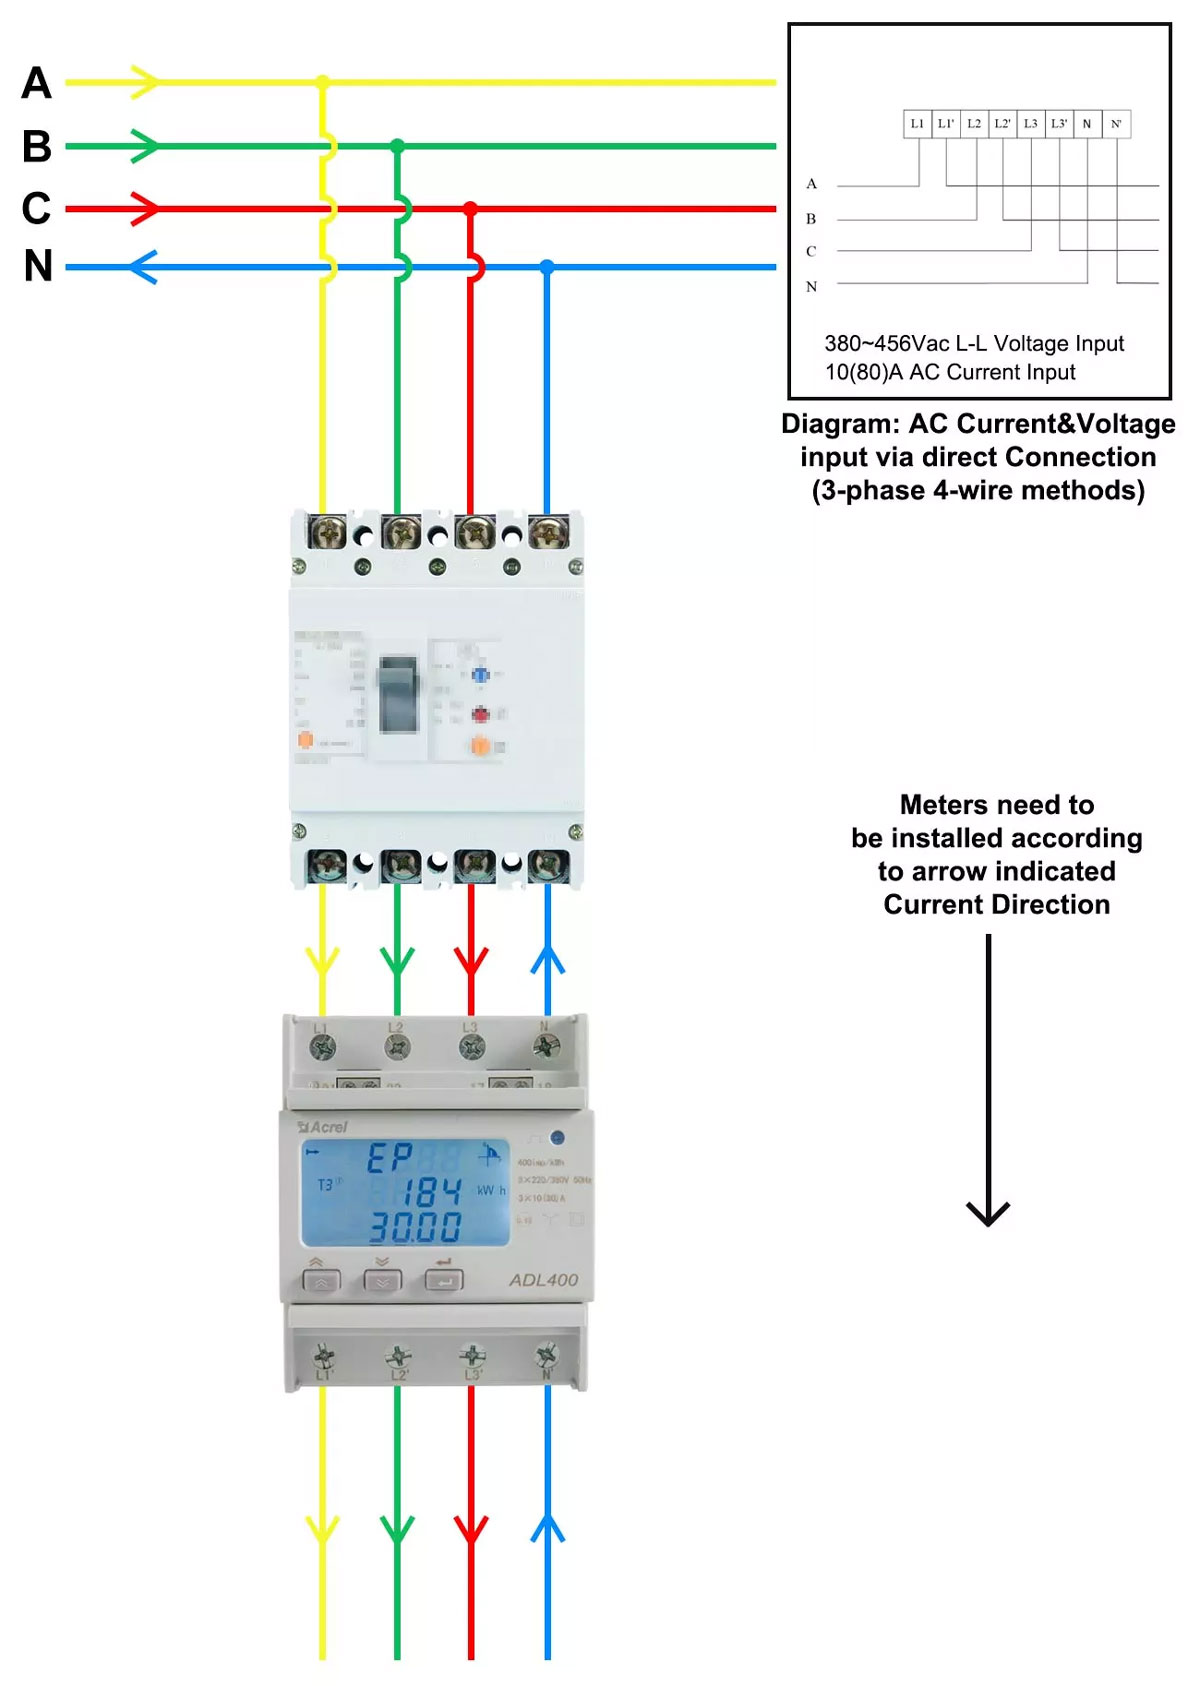 Power-Wiring-3-phase-4-wire-via-direct-connect.jpg